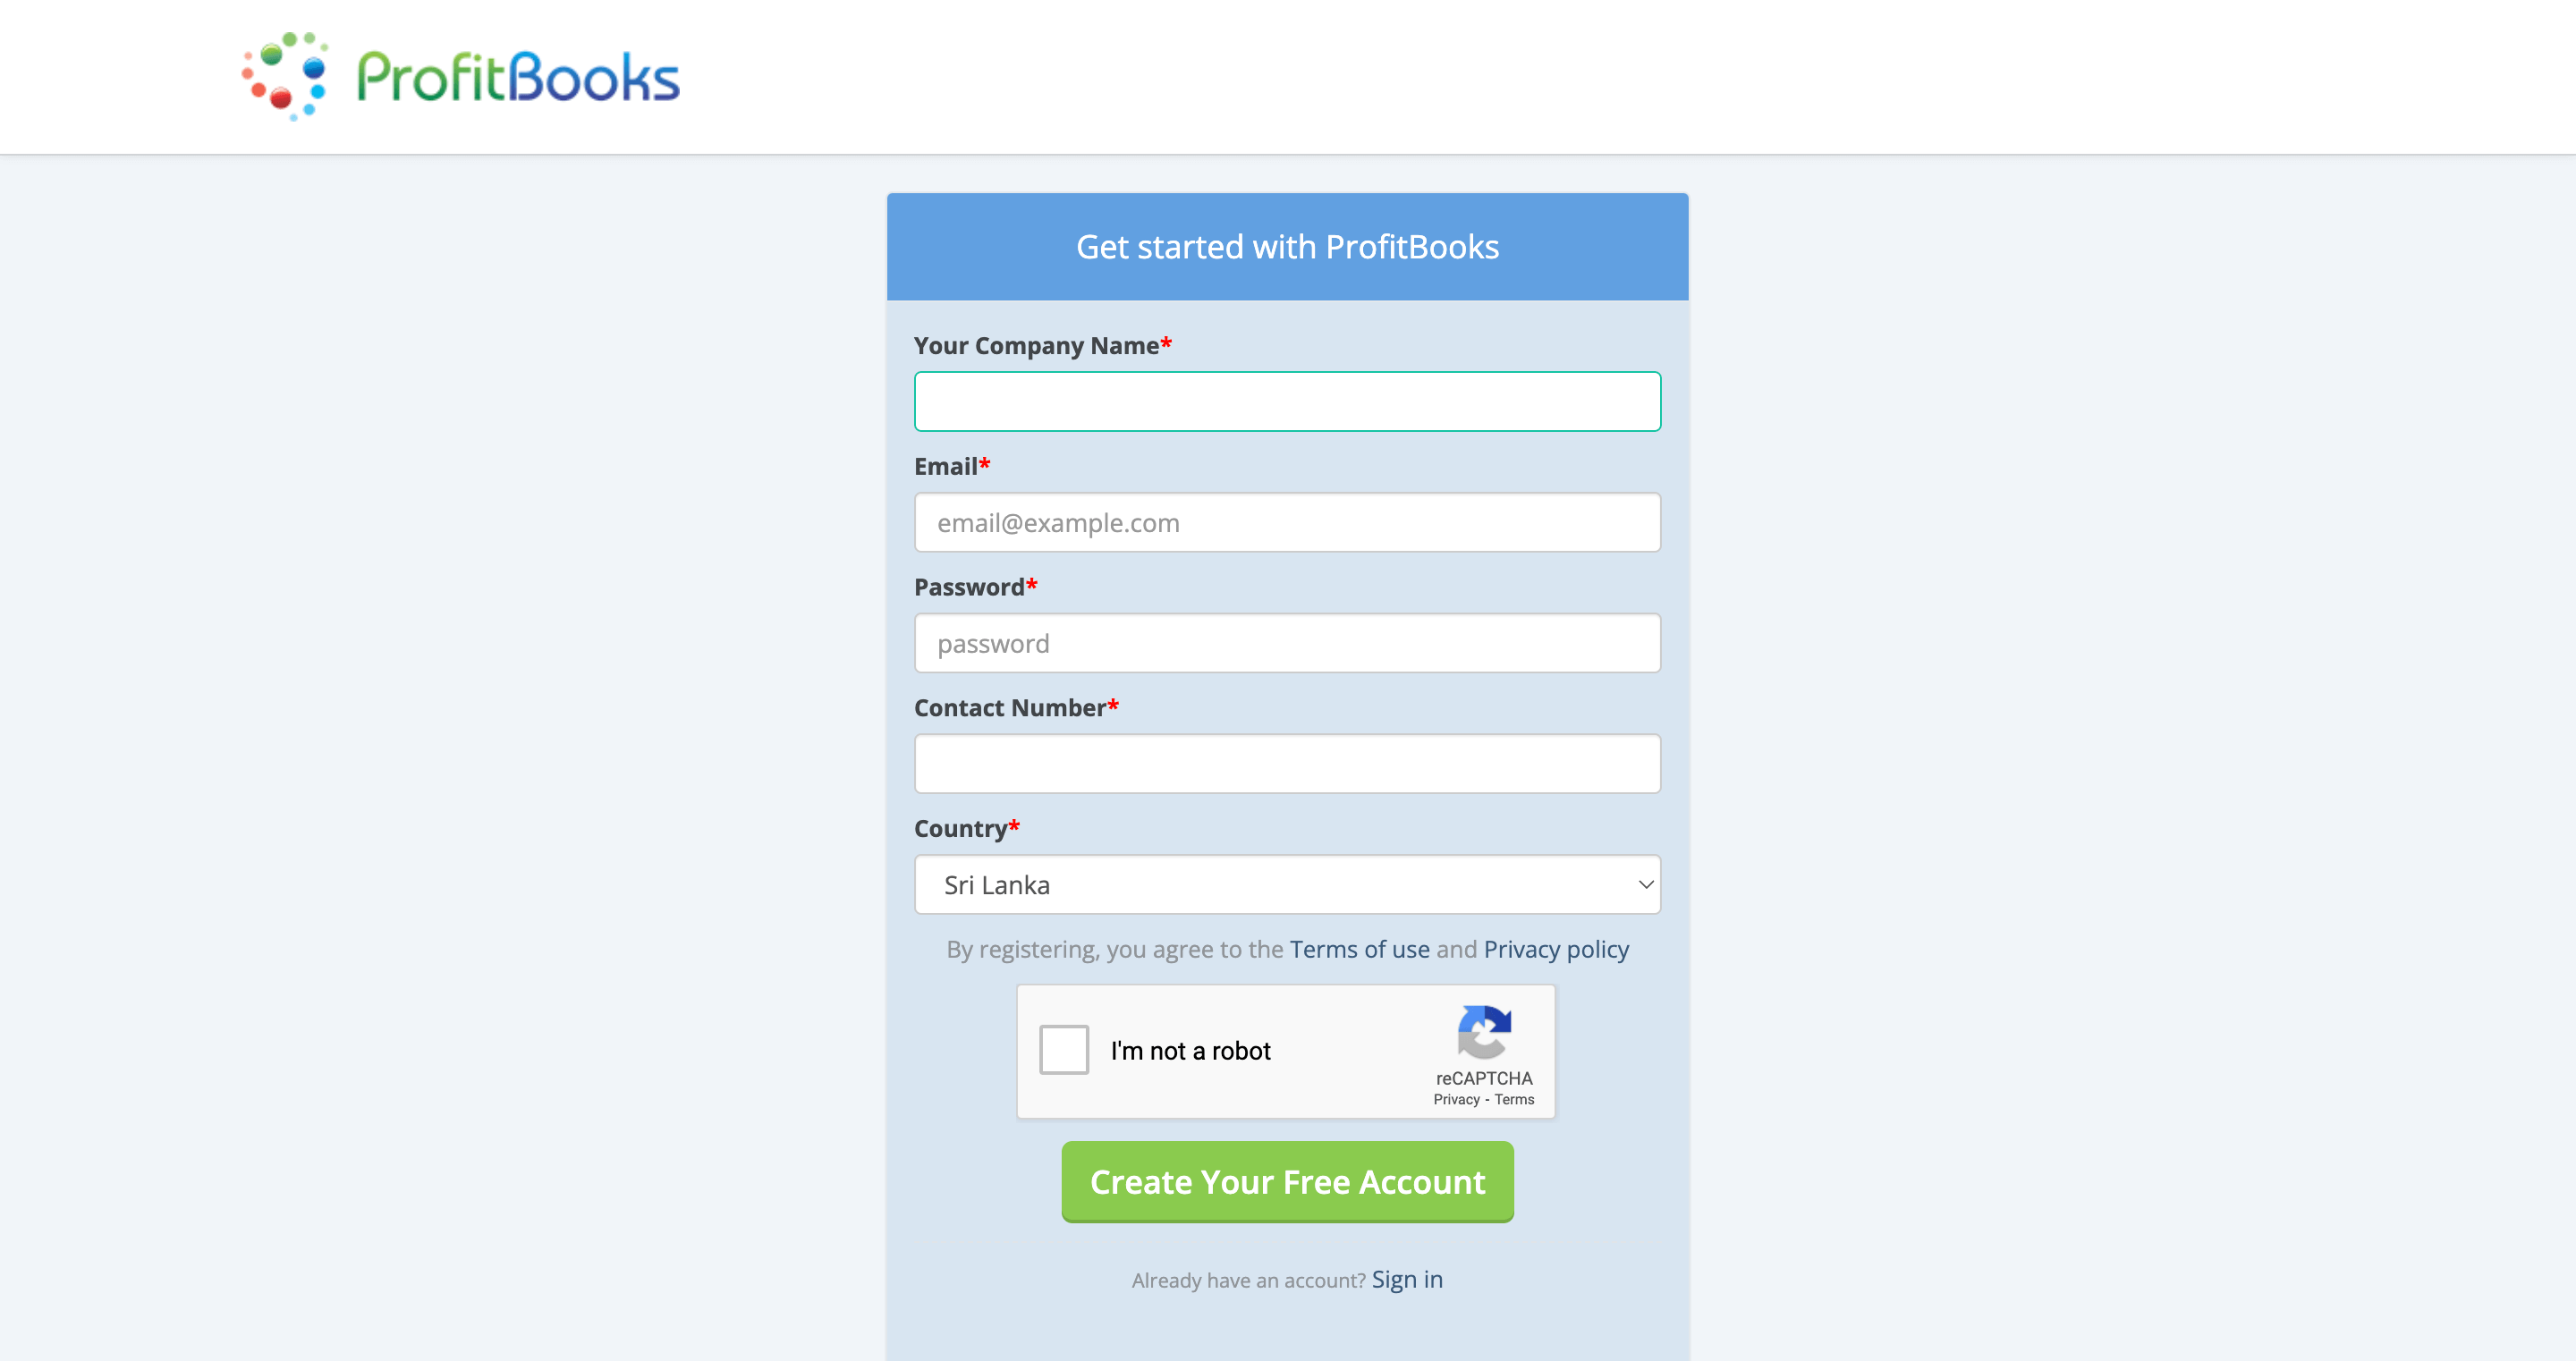 Profitbooks free trial signup page